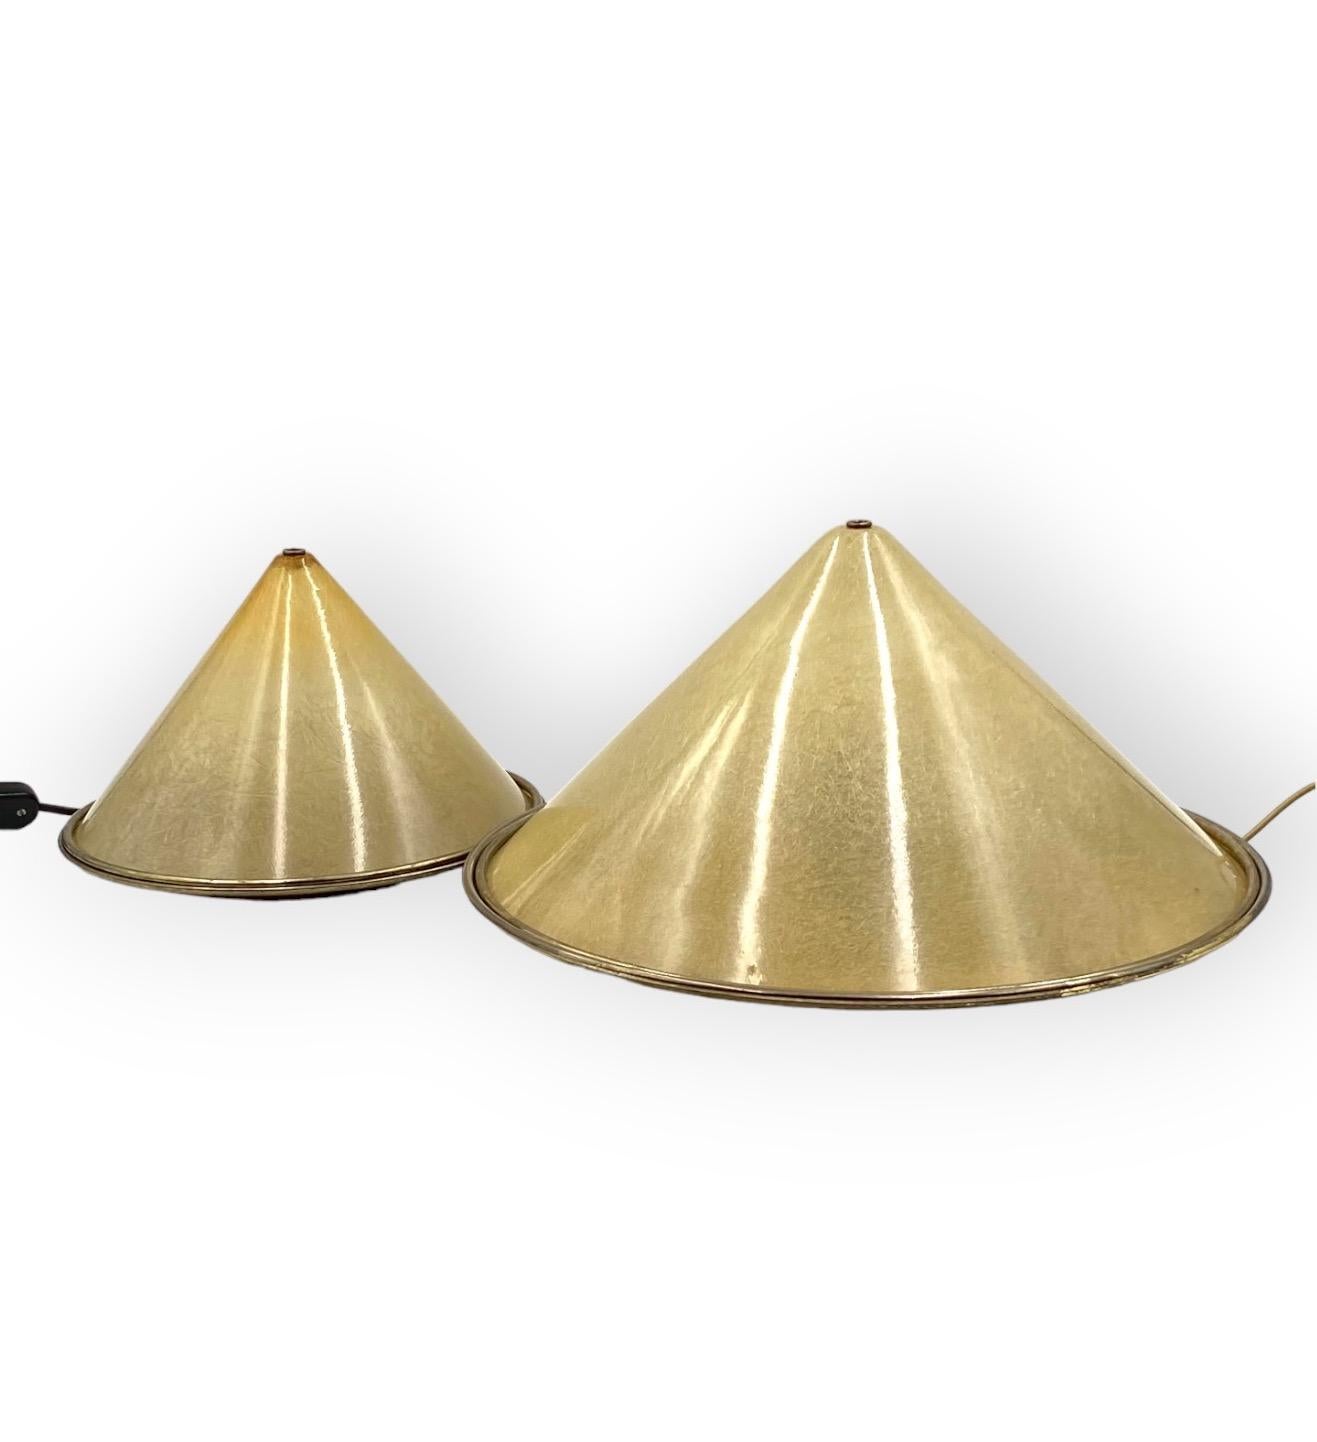 Set of 2 conic shaped fiberglass and brass table lamps, Italy 1970s For Sale 3